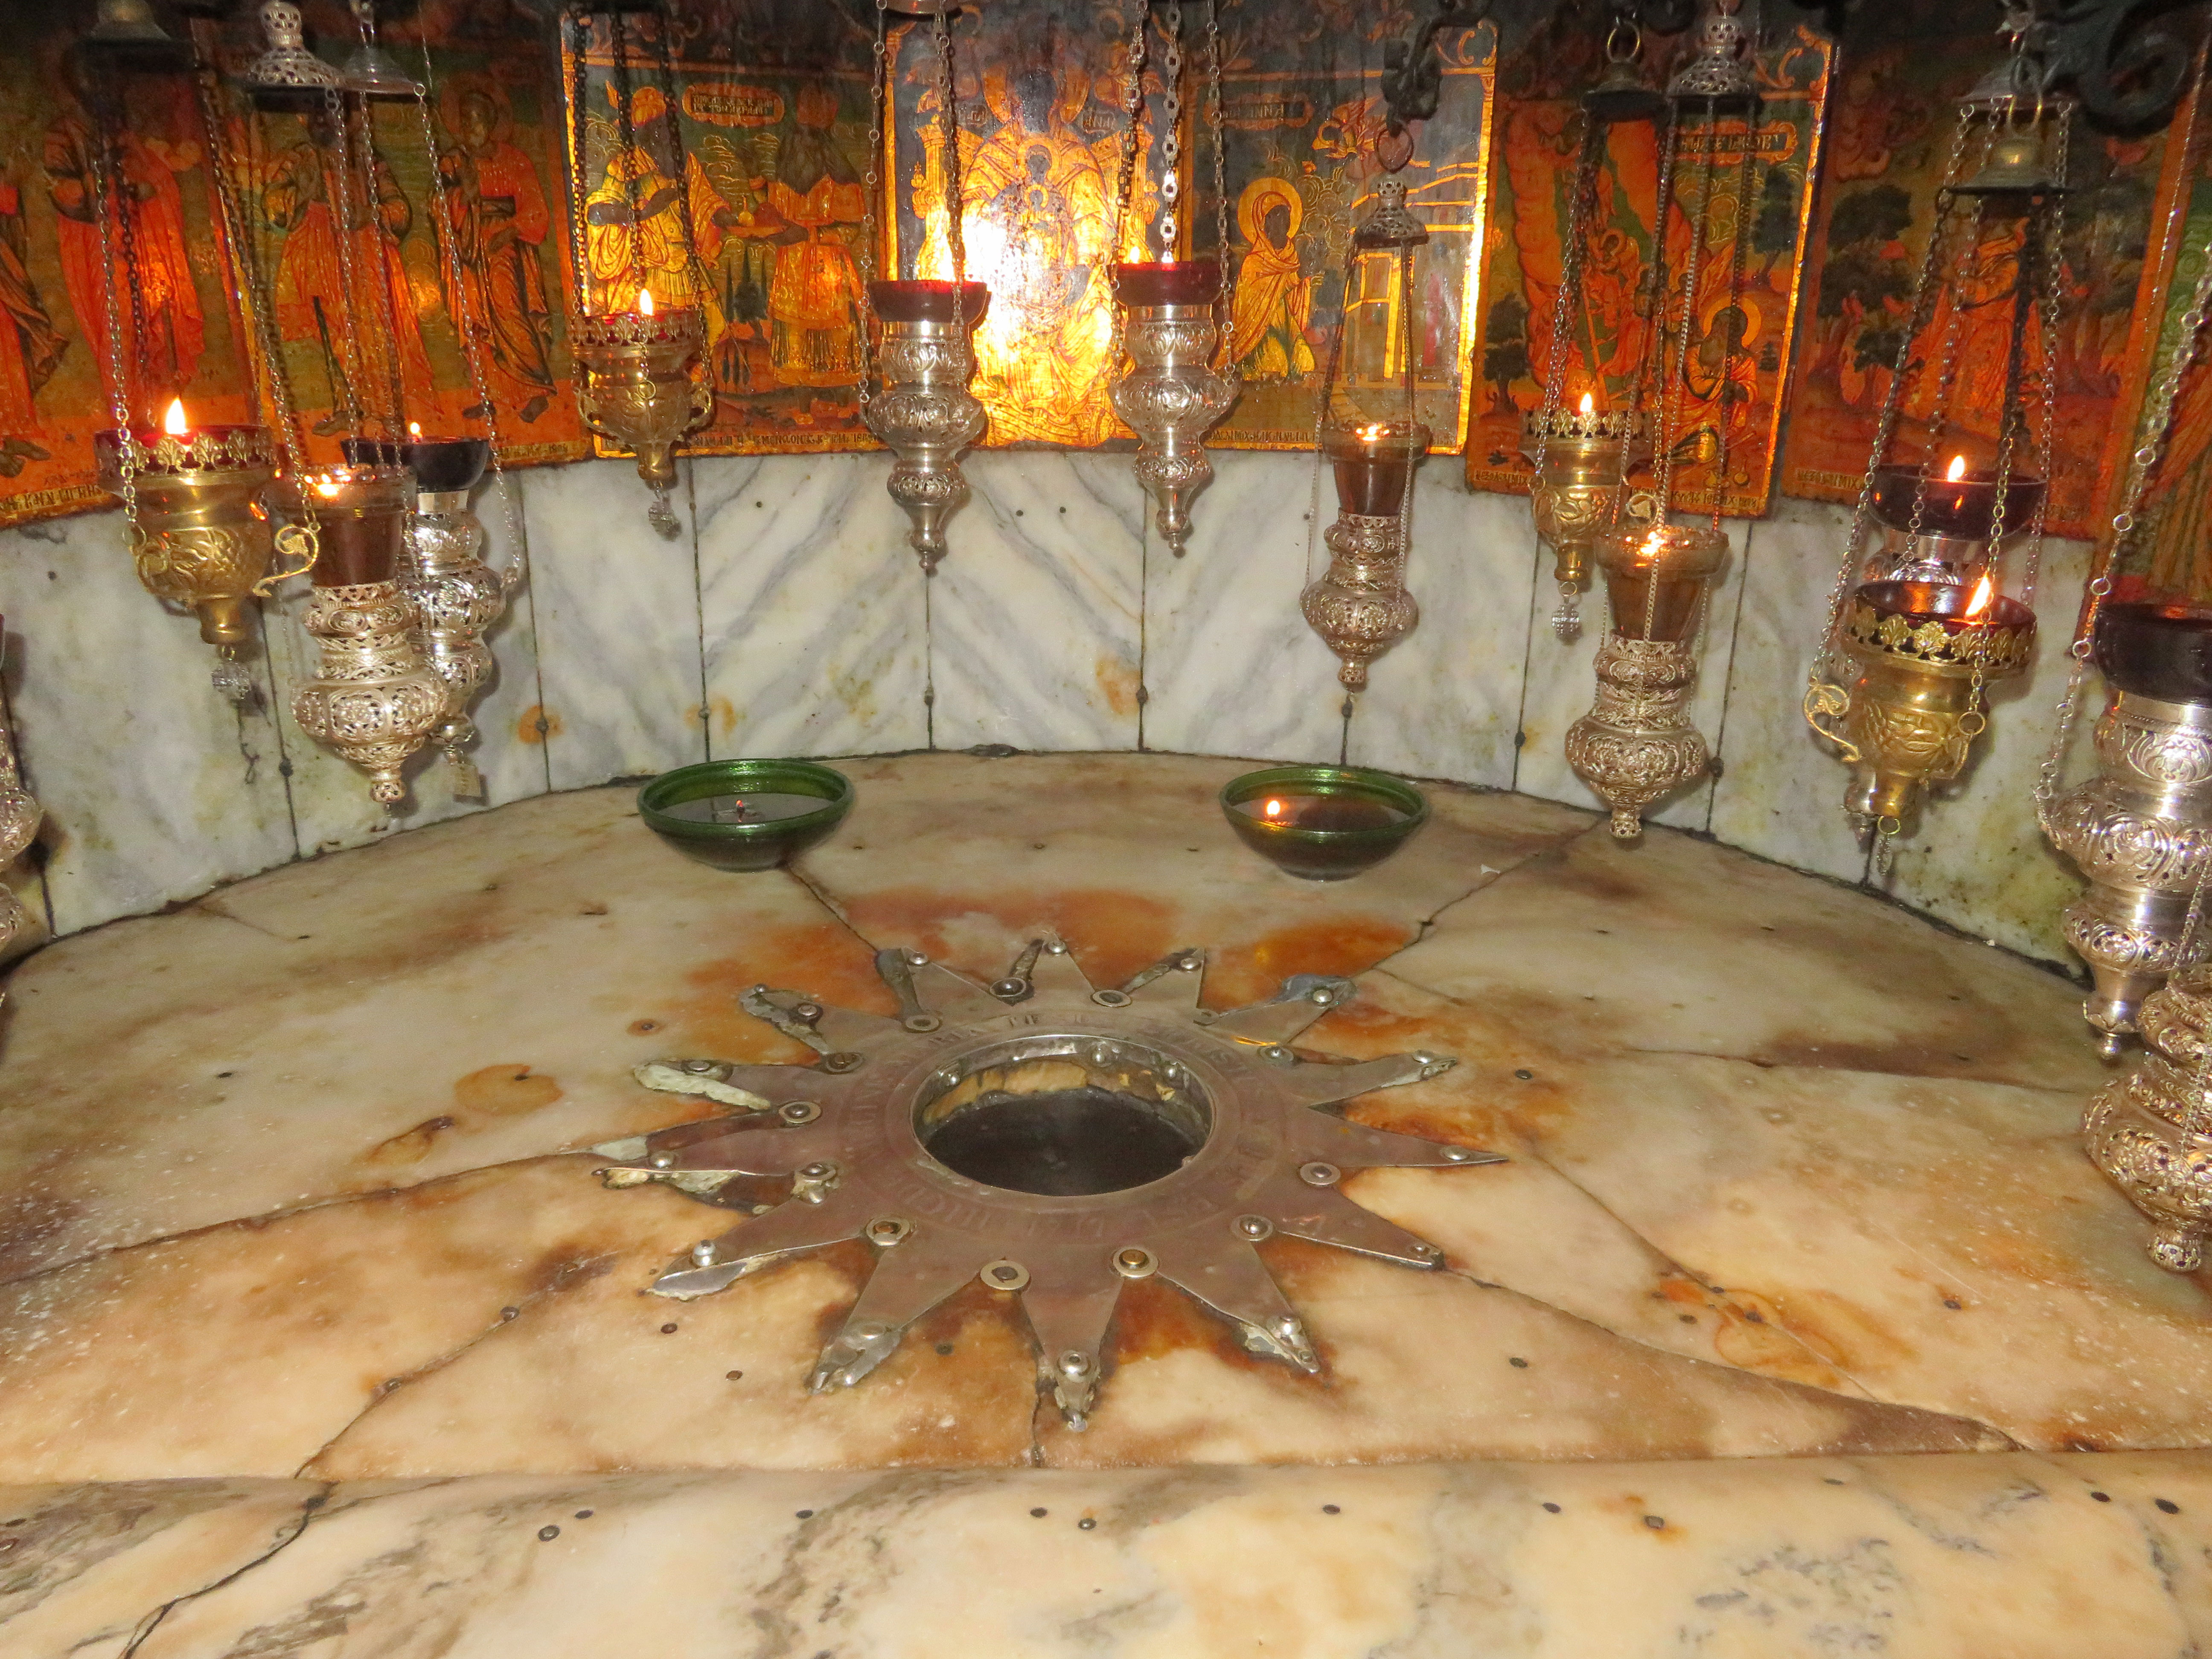 The fourteen-pointed star set in marble marks the place where tradition says Christ was born in Bethlehem’s Church of the Nativity.